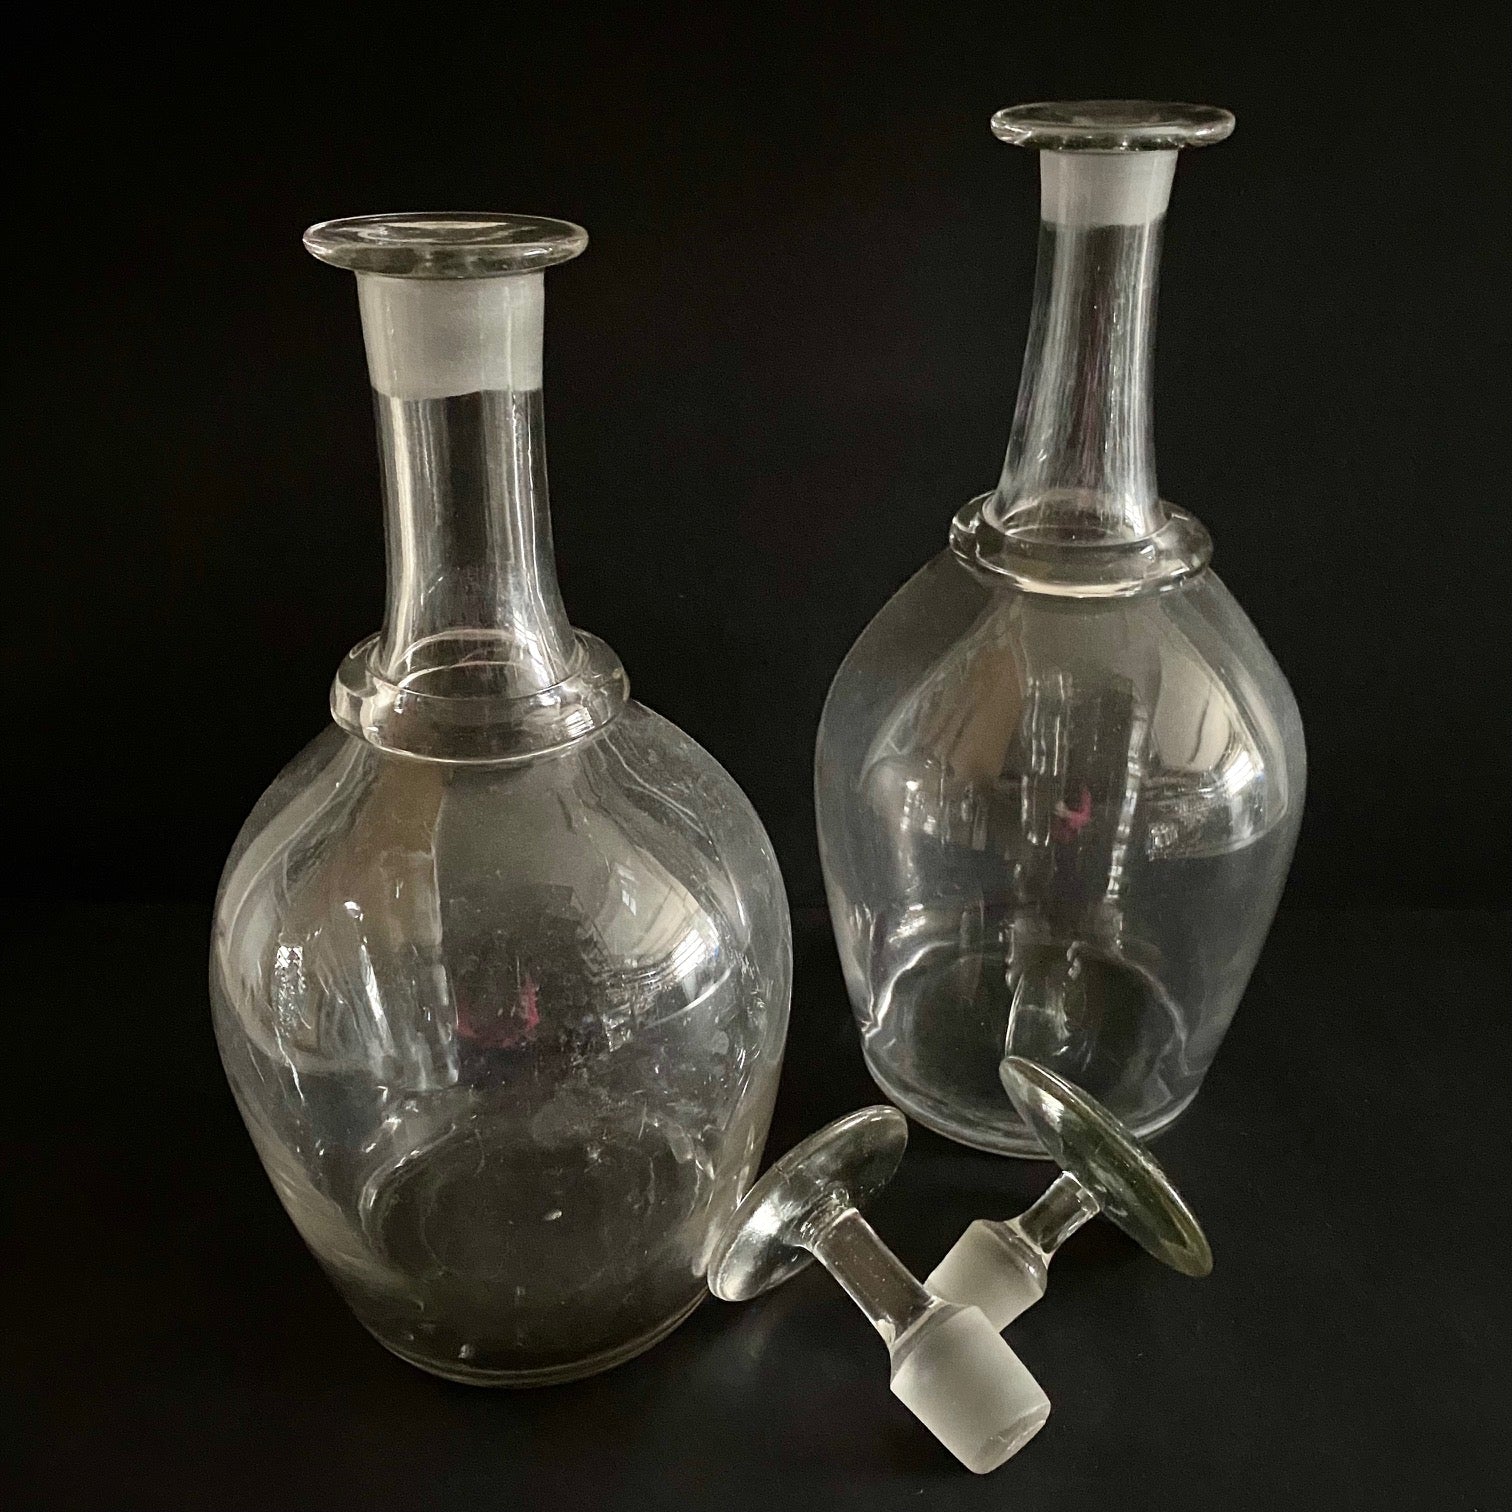 PAIR HUGE ANTIQUE FRENCH GLASS DECANTERS